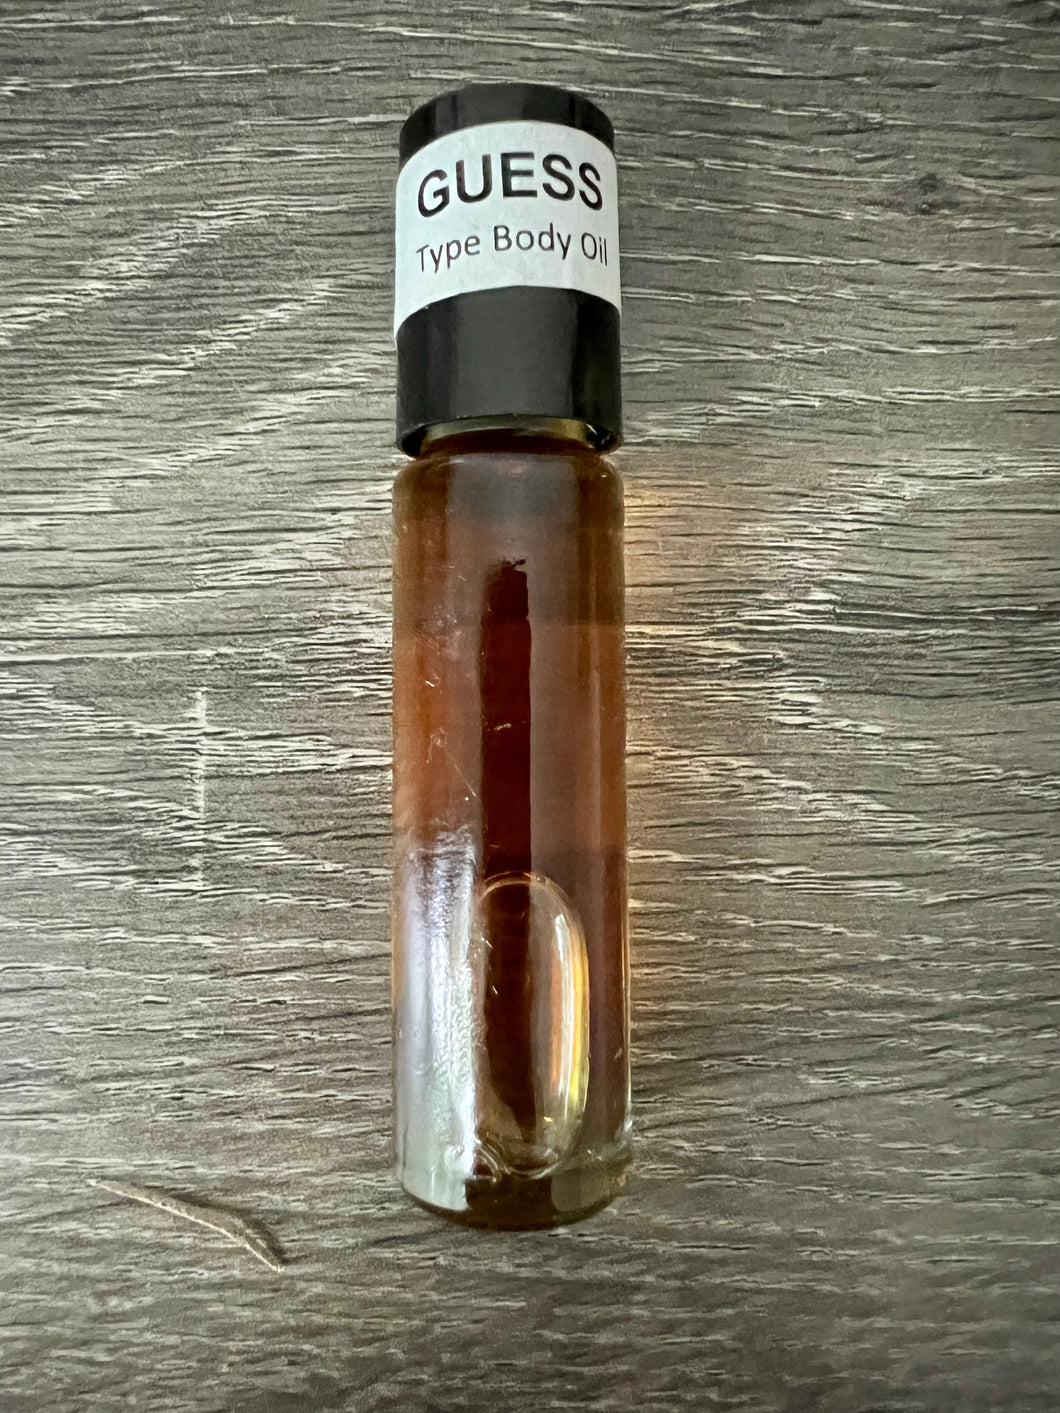 Guess Body Oil